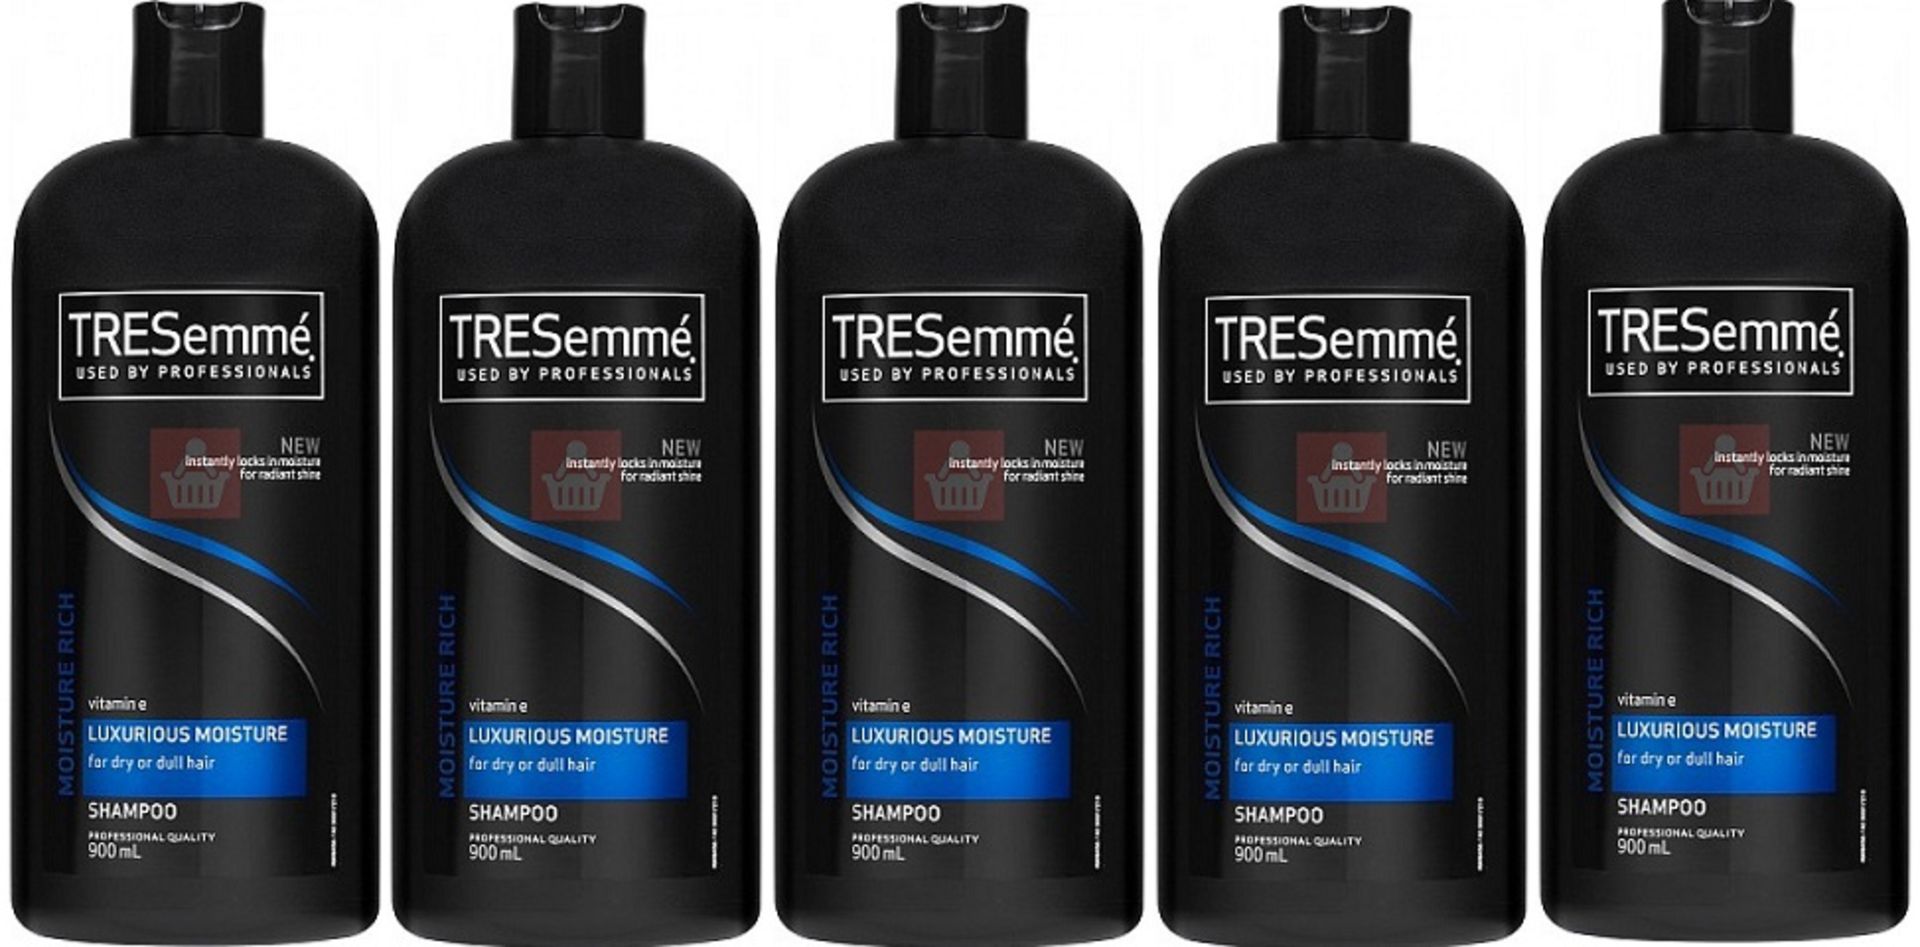 V *TRADE QTY* Brand New Lot of 5 TRESemme Professional 900ml Luxurious Moisture Shampoo (for dry